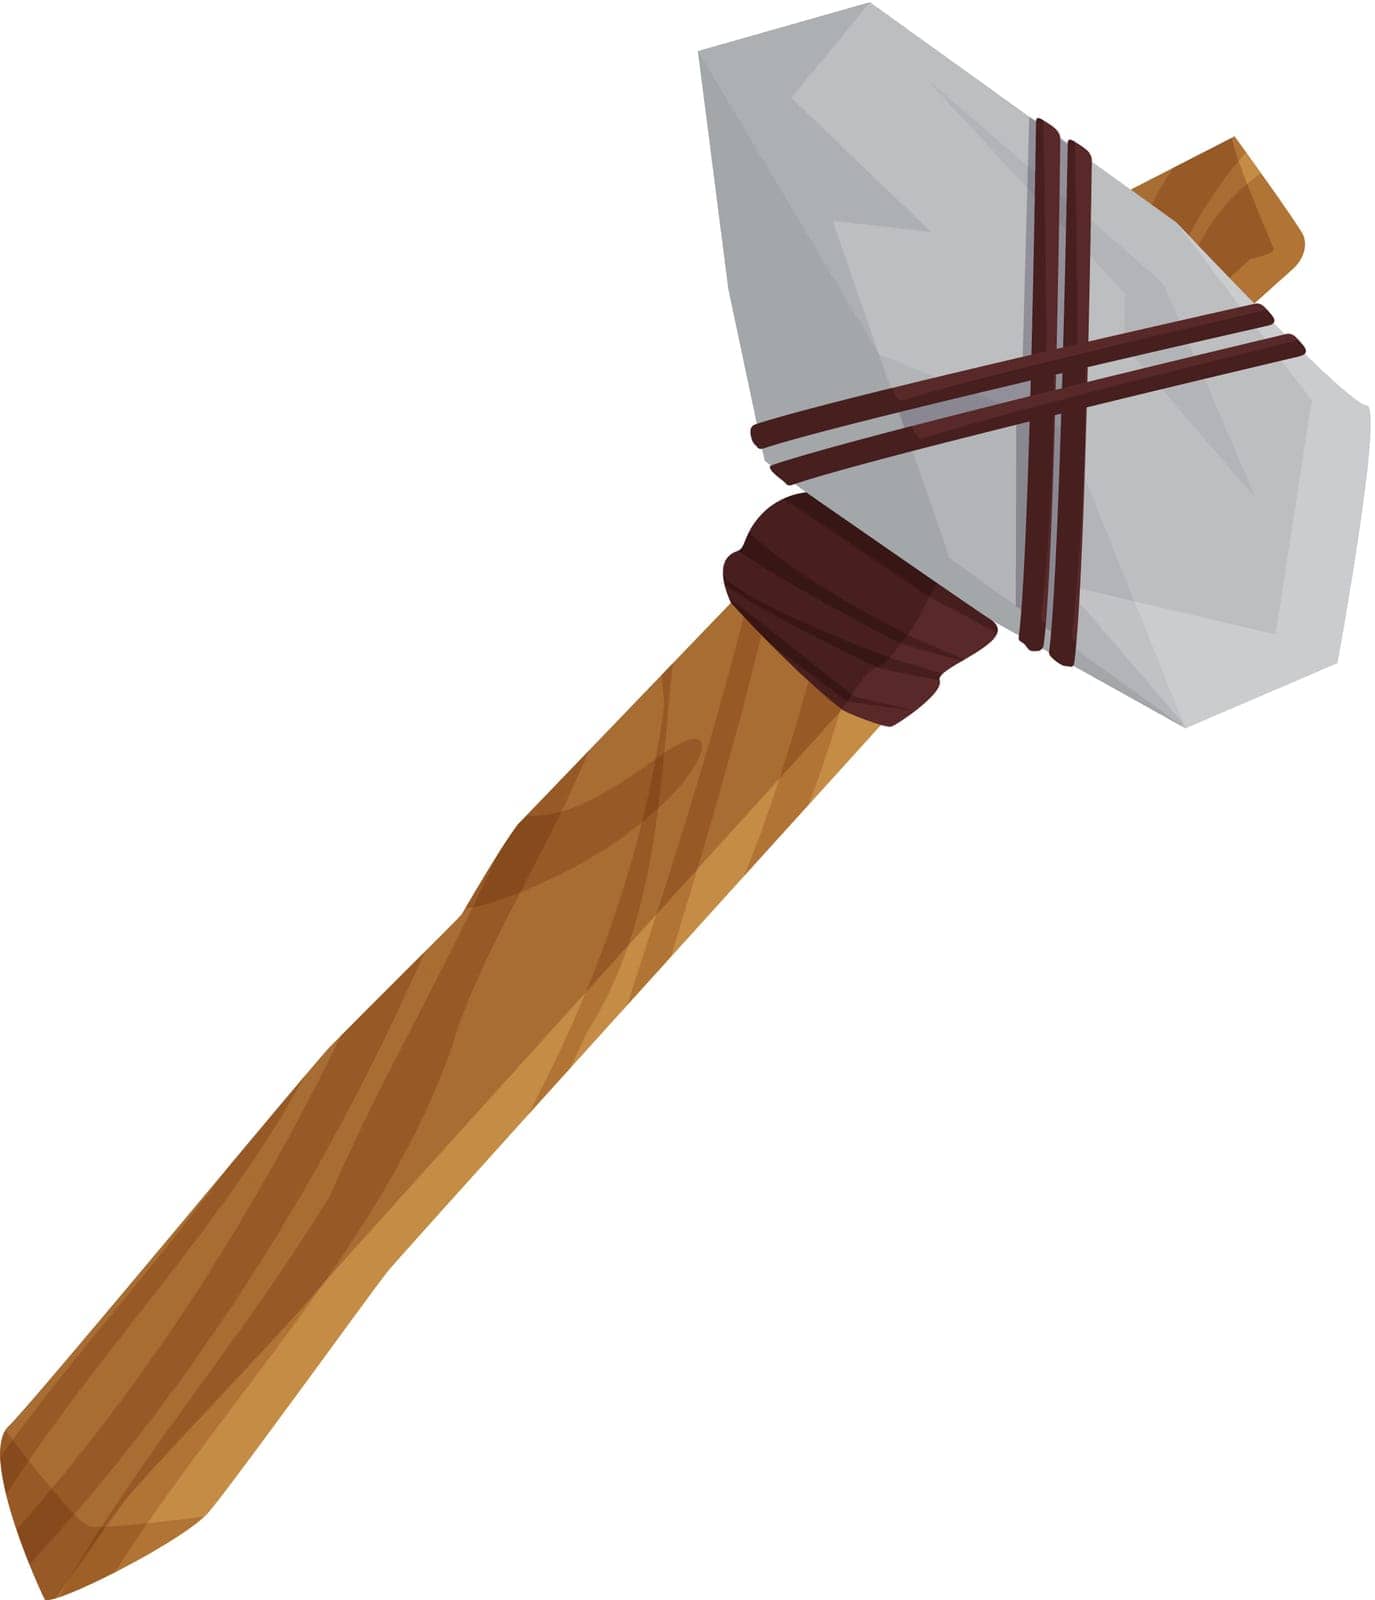 Stone age hammer by Lembergvector